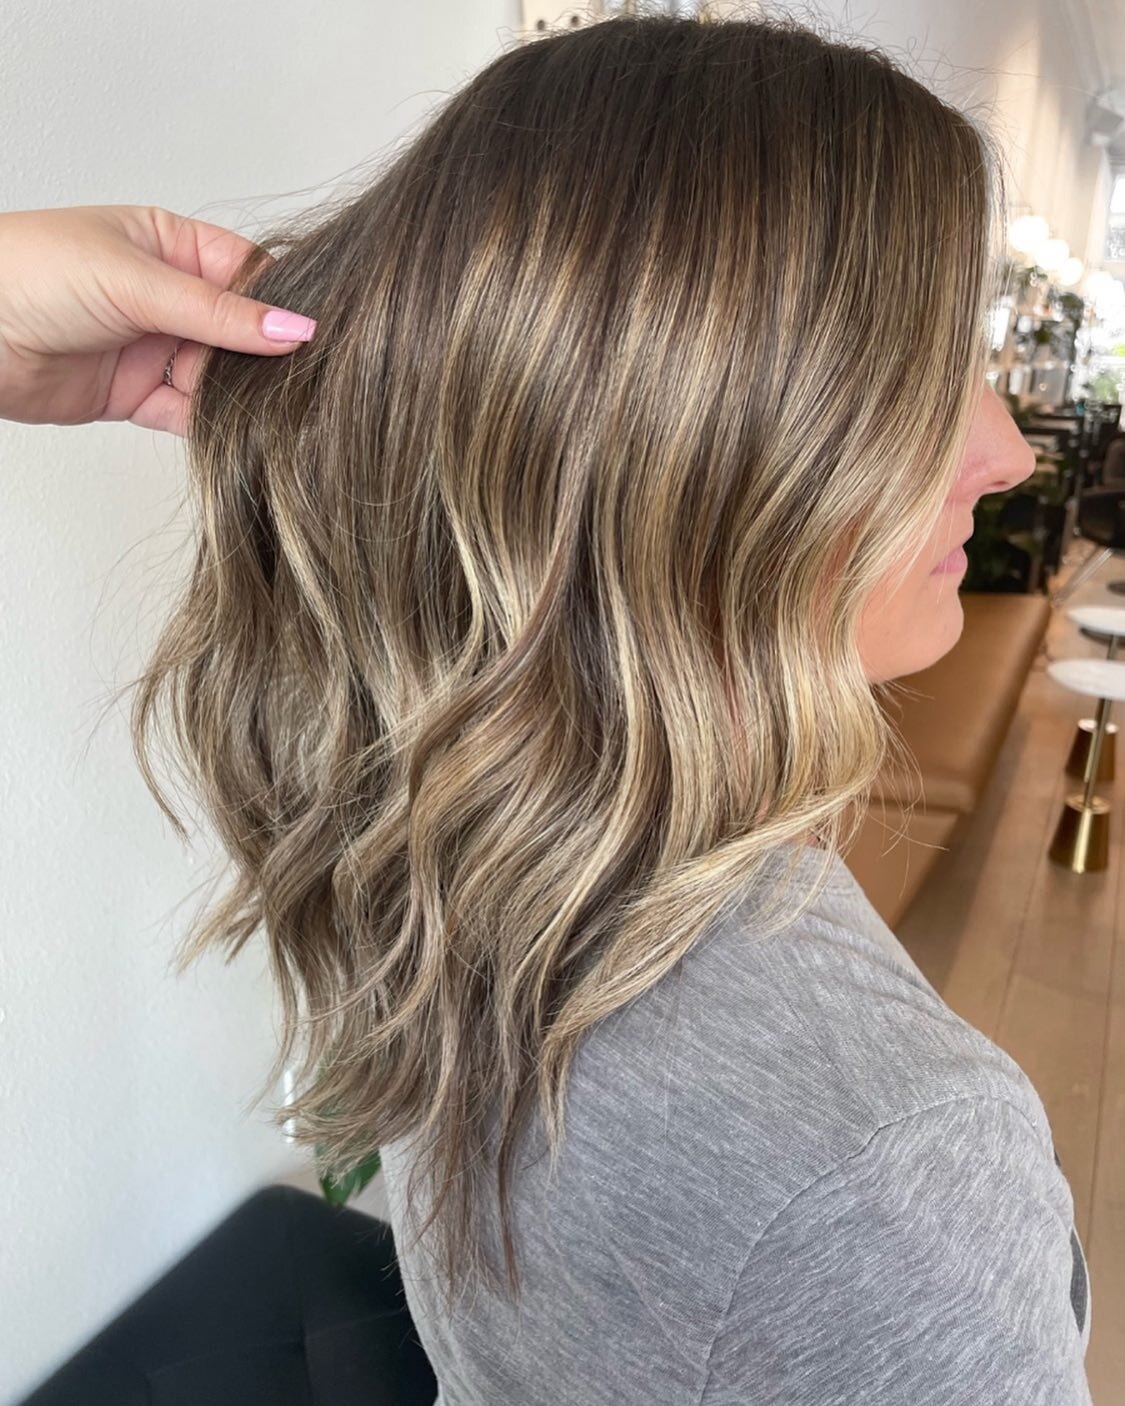 GUESS WHO&rsquo;S BACK 🤍

Starting NOW, you can book with our returning stylist Payge Marie. She loved her time home to heal and learn the new adventure of becoming a mama, but she&rsquo;s excited to get back into the salon and slay some hair! 

She